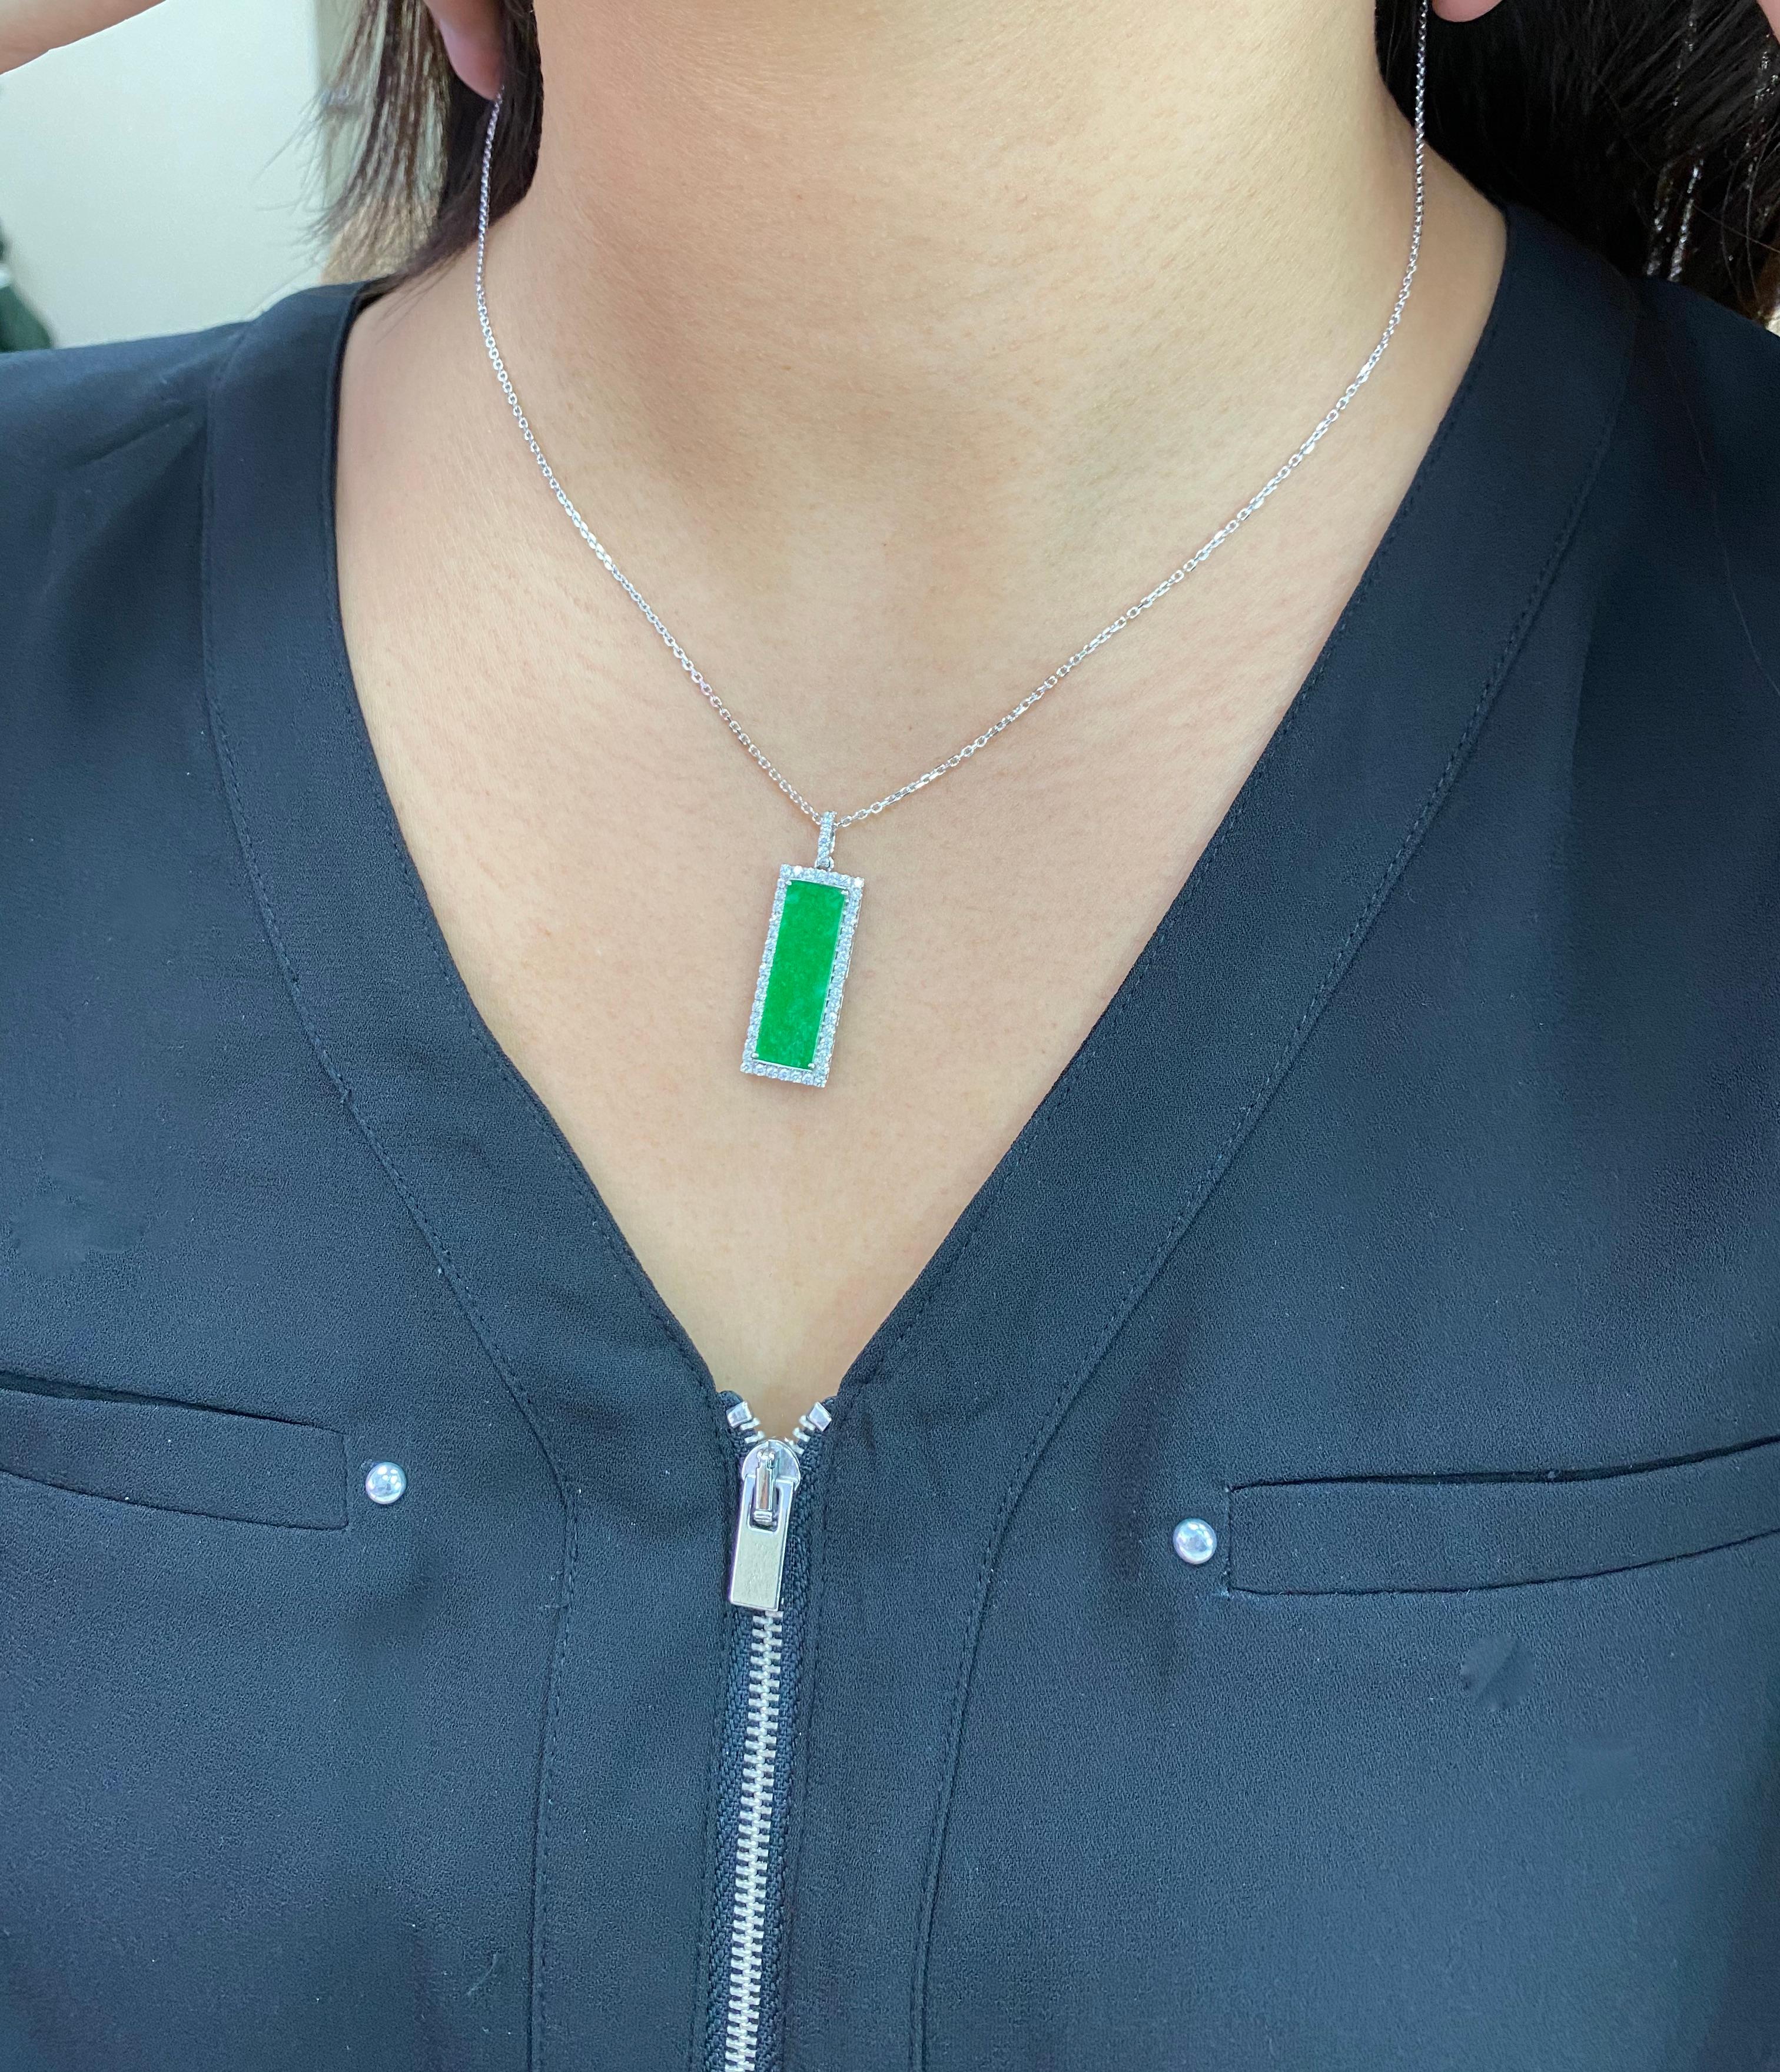 Here is a natural apple green Jade and diamond pendant. It is certified. The pendant is set in 18k white gold and diamonds. On the reverse, is a patterned motif that is hand engraved by a master goldsmith. There are approximately 1 cts of small